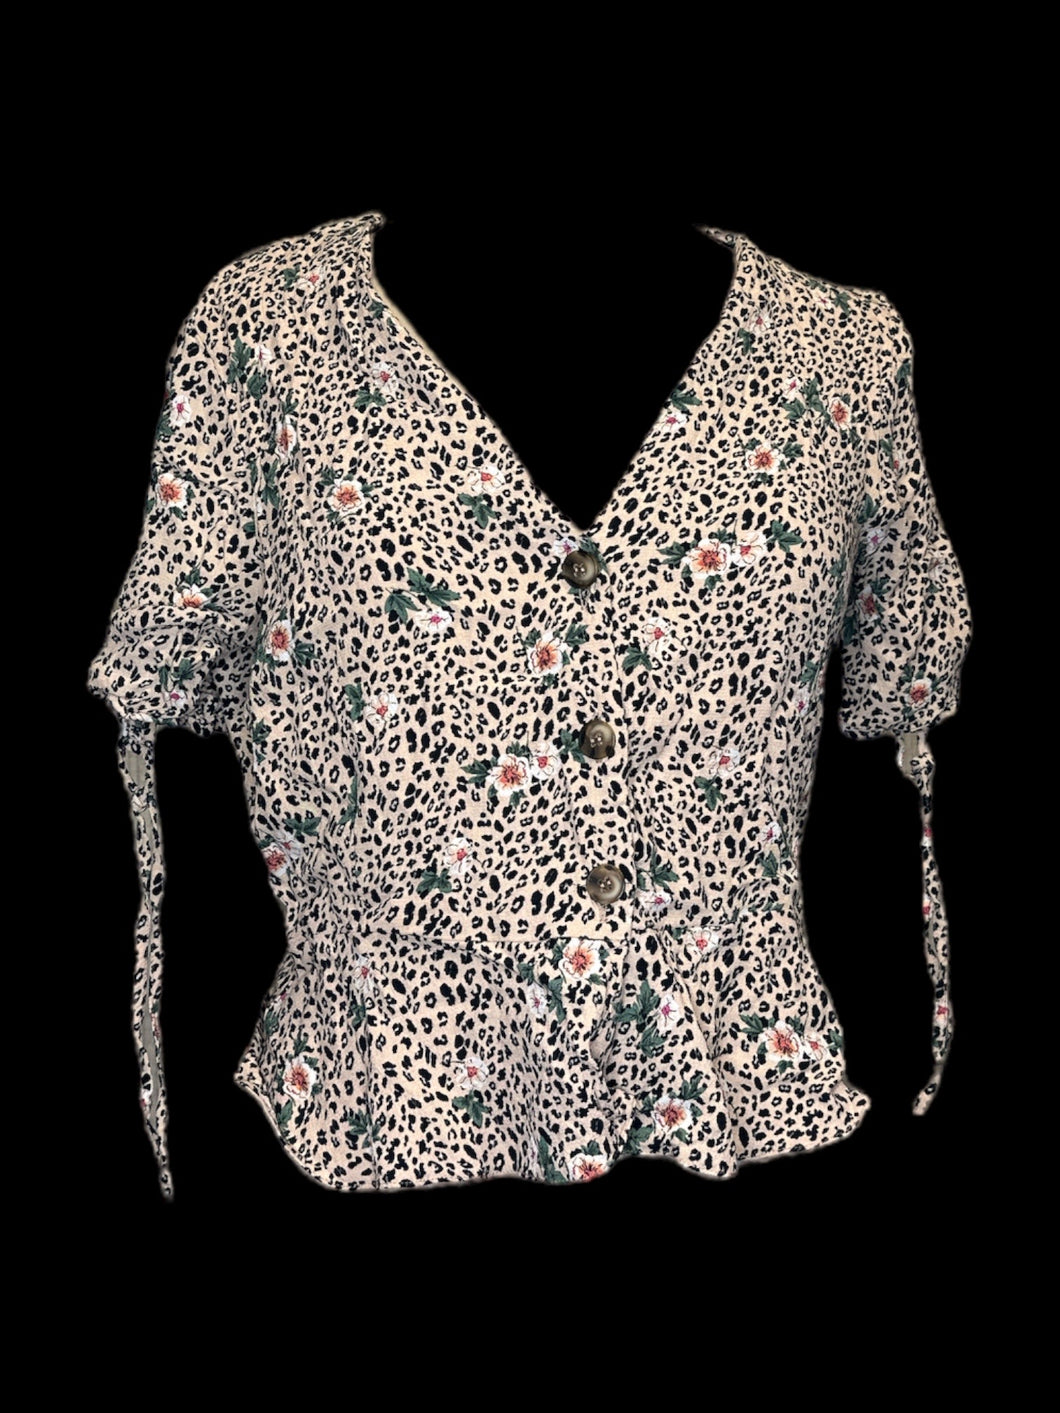 M Camel V neck animal print short sleeve button down top w/ floral accents, & sleeve ties